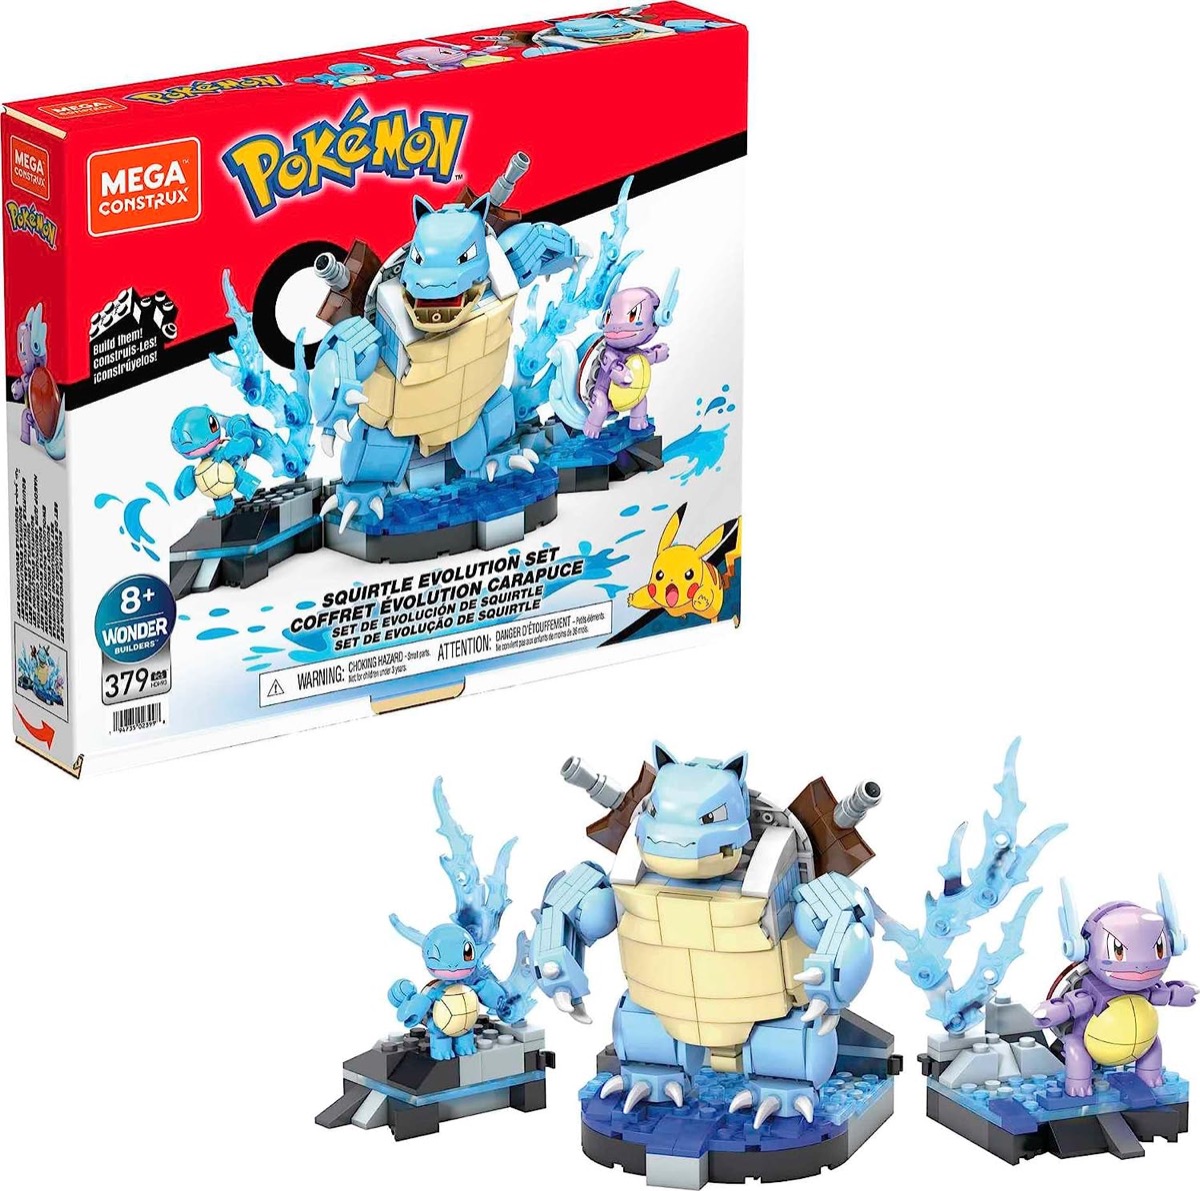 Squirtle Evolution Building Set from "Pokemon" 